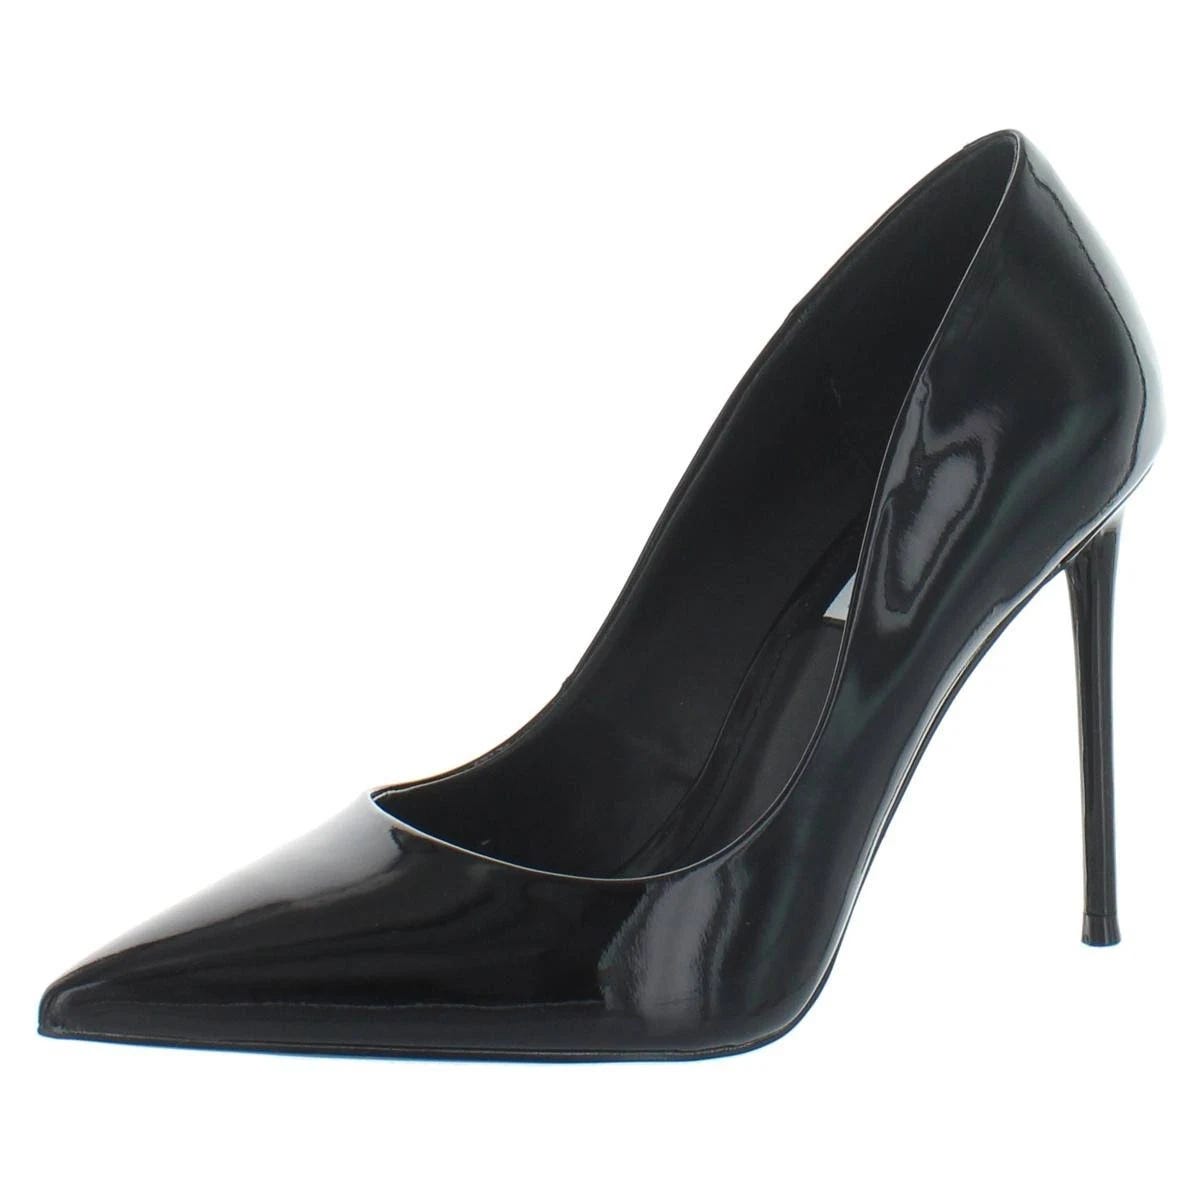 Pointed Toe Stiletto Pumps: Comfortable & Sexy | Image